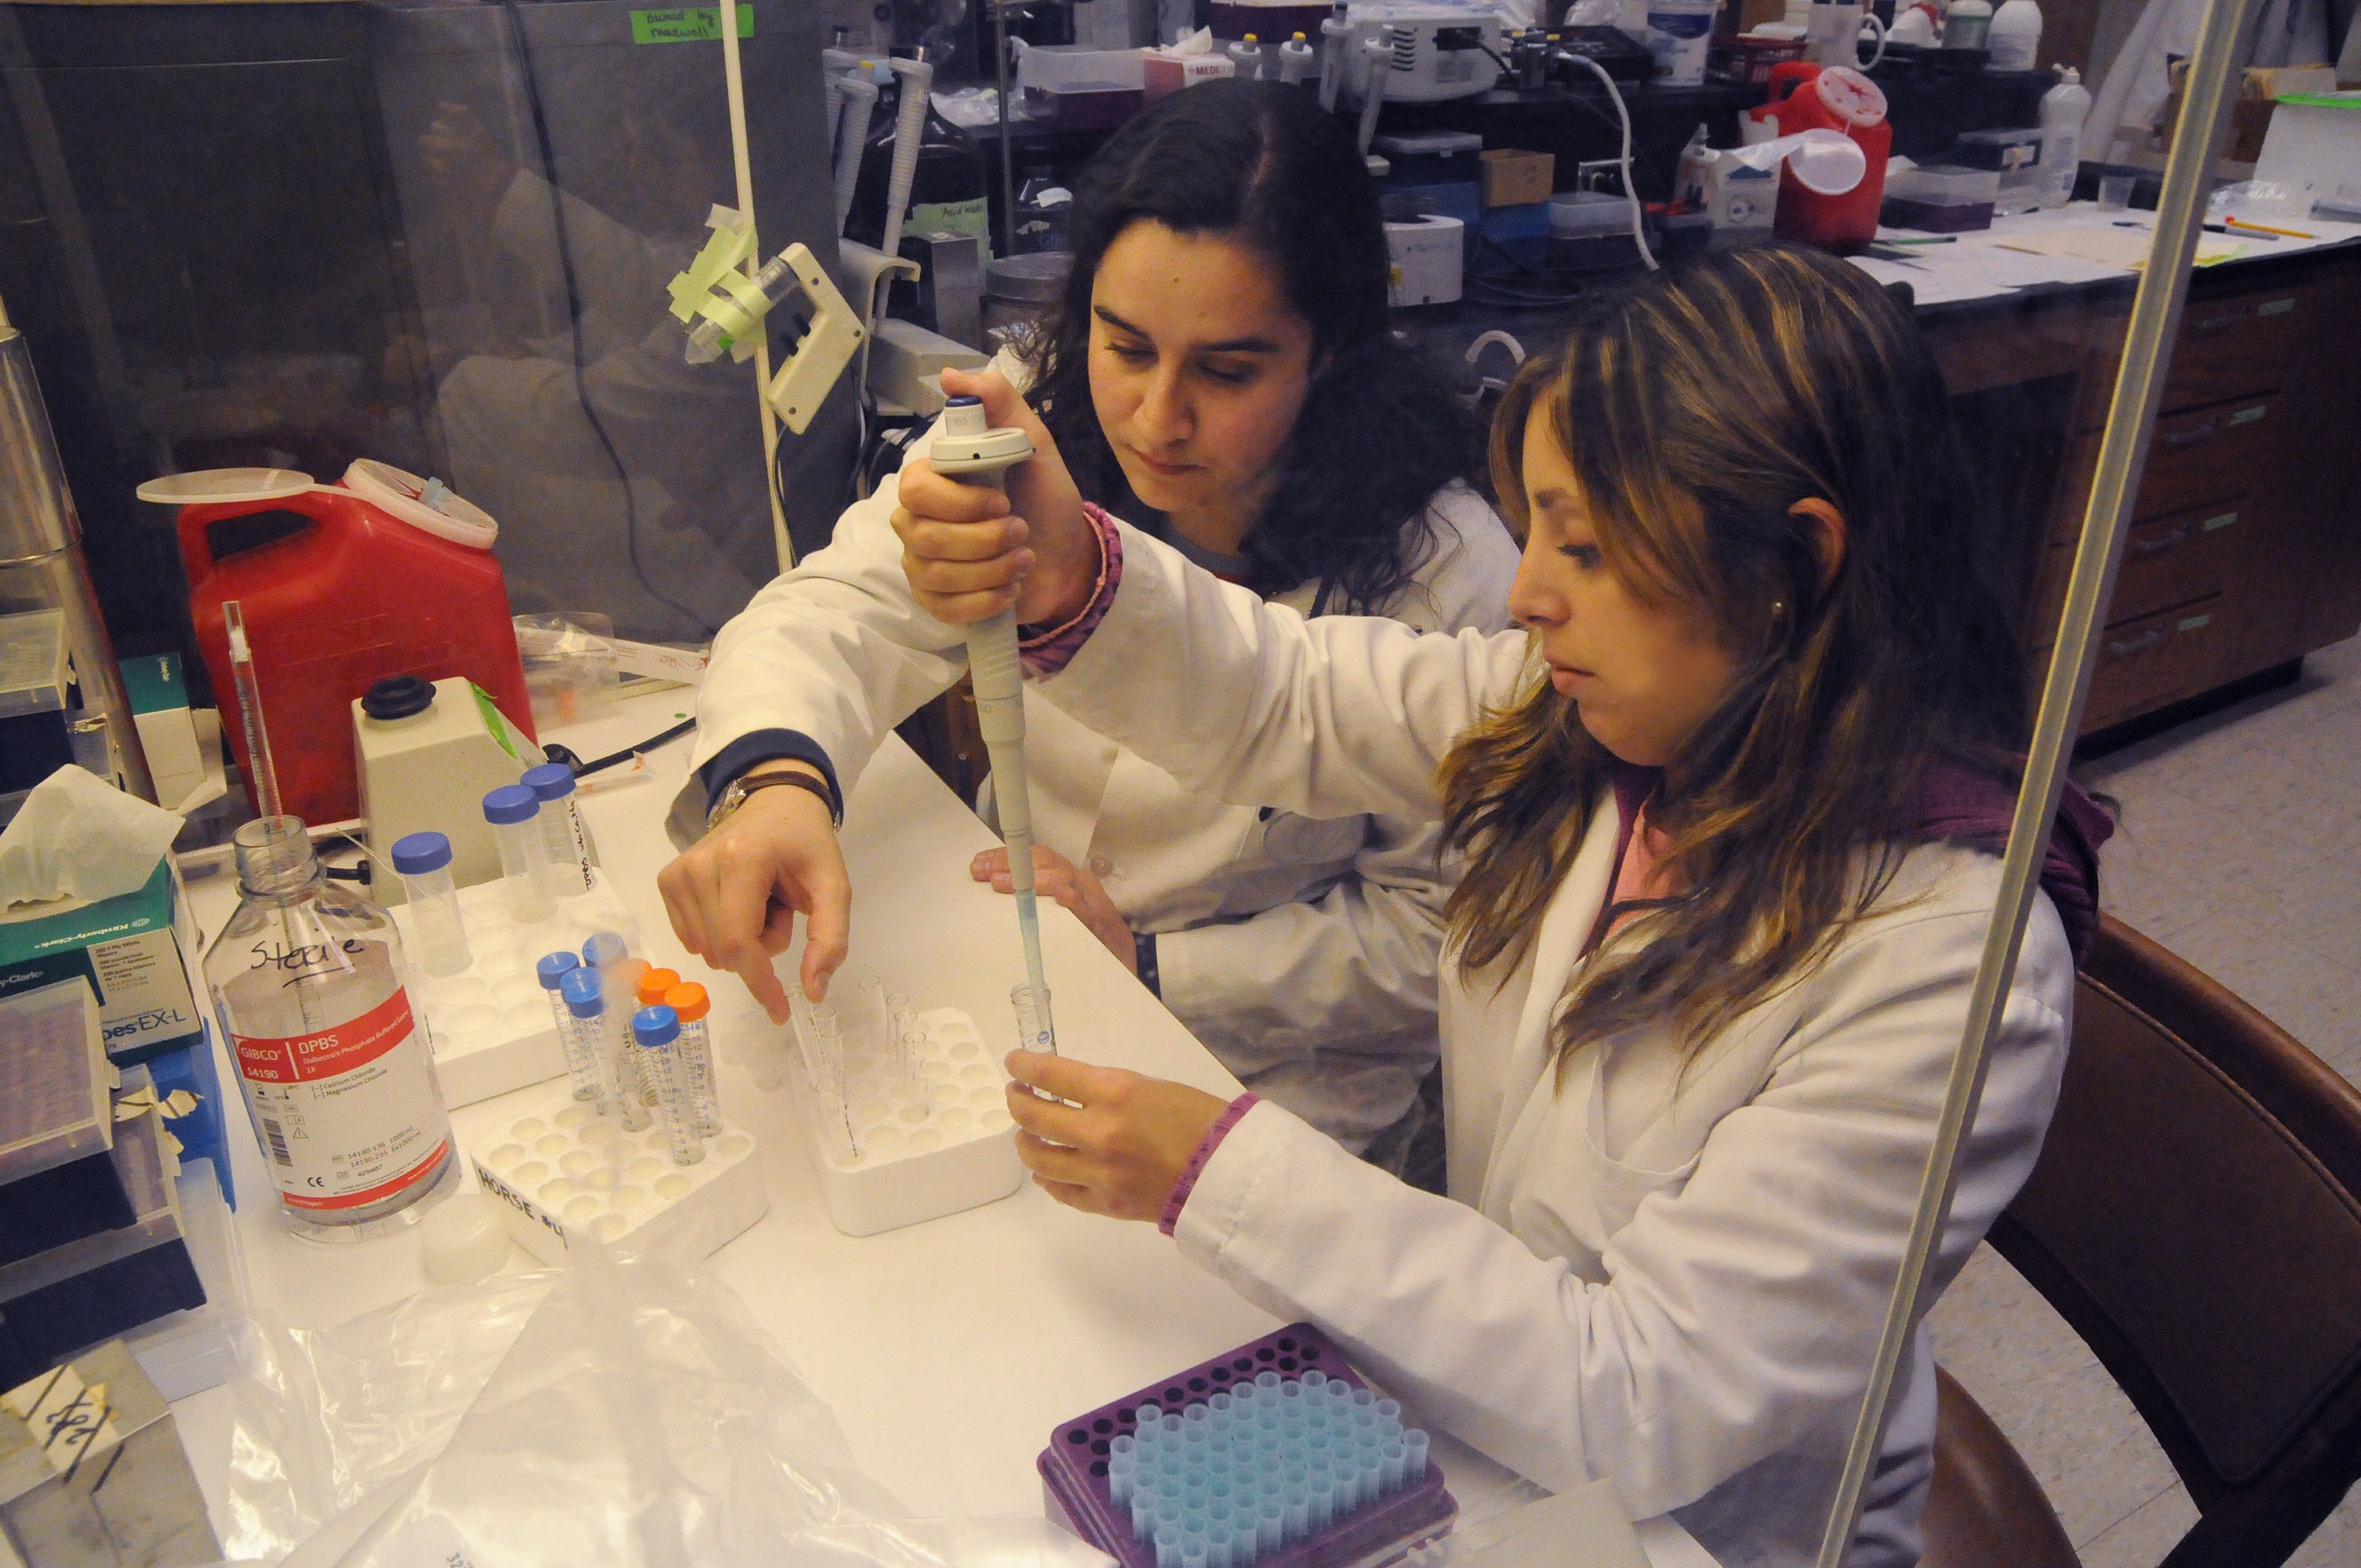 Dr. Marianne Werner (left), a veterinarian from Chile, and Sofia Oettinger (right), a veterinary student from the University of Austral in Chile who is conducting research as part of her senior thesis, work in Dr. Virginia Buechner-Maxwell's lab in the Virginia-Maryland Regional College of Veterinary Medicine at Virginia Tech.